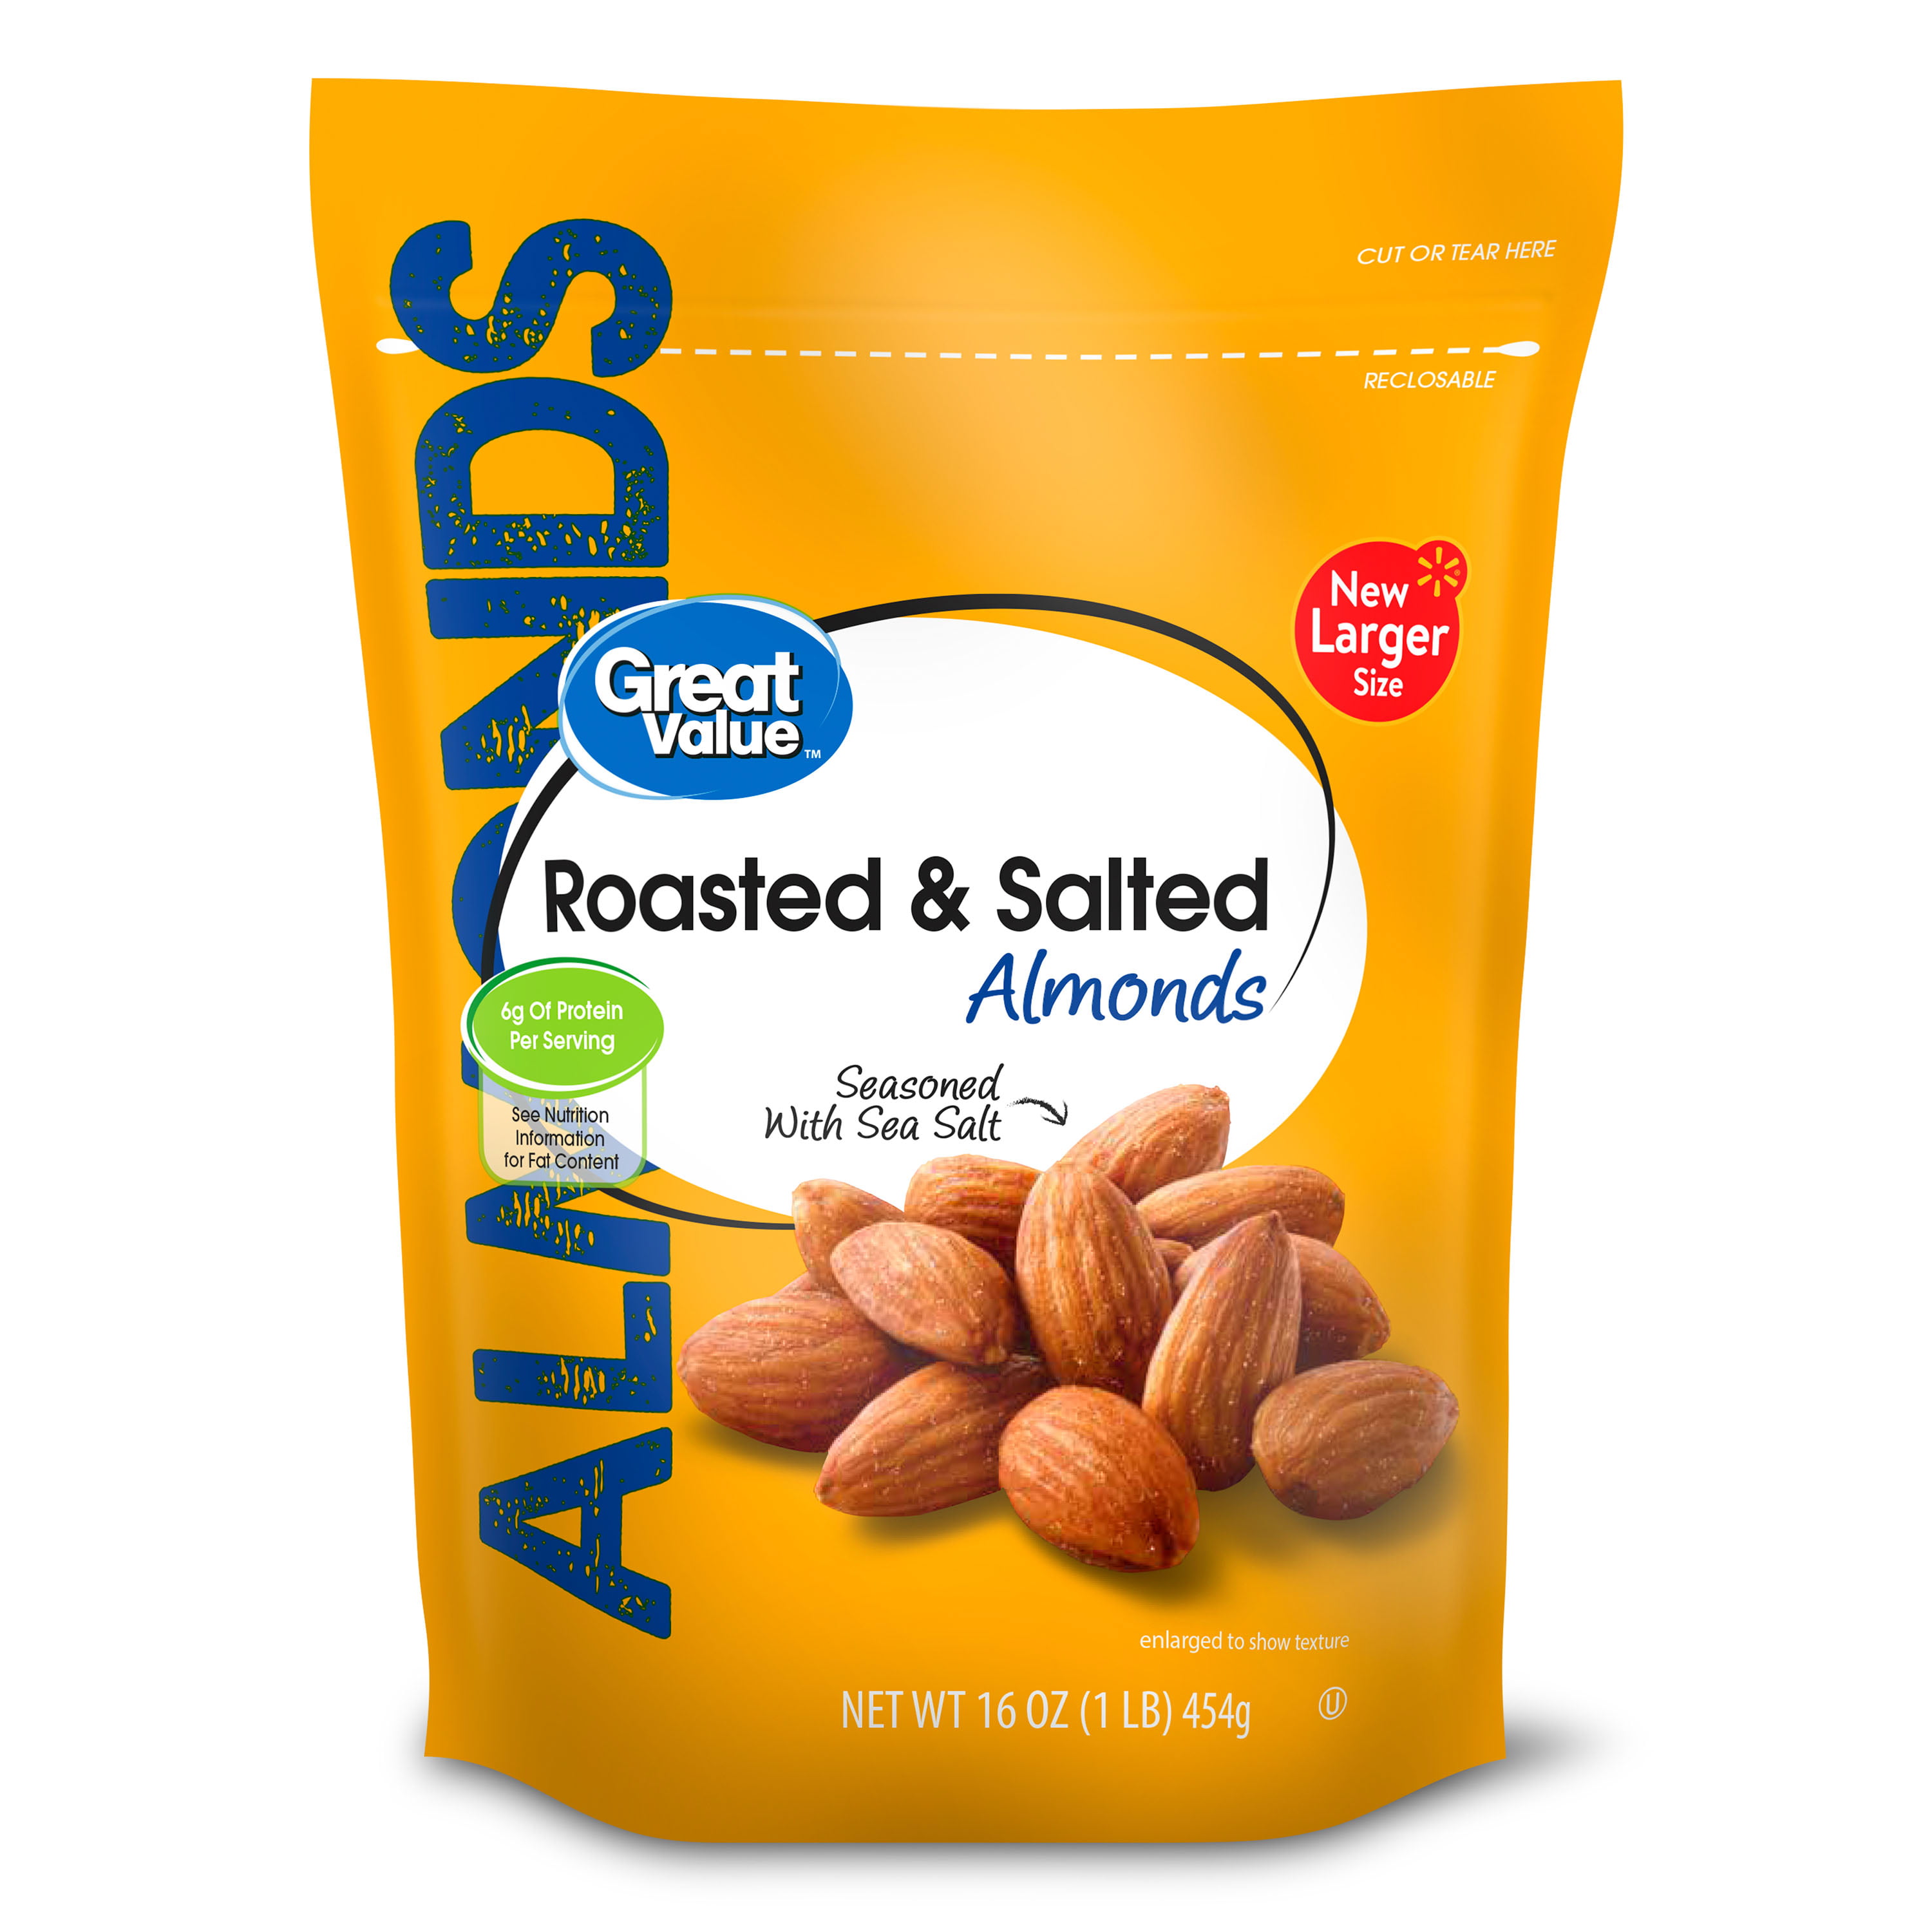 Great Value Roasted & Salted Almonds, 16 oz